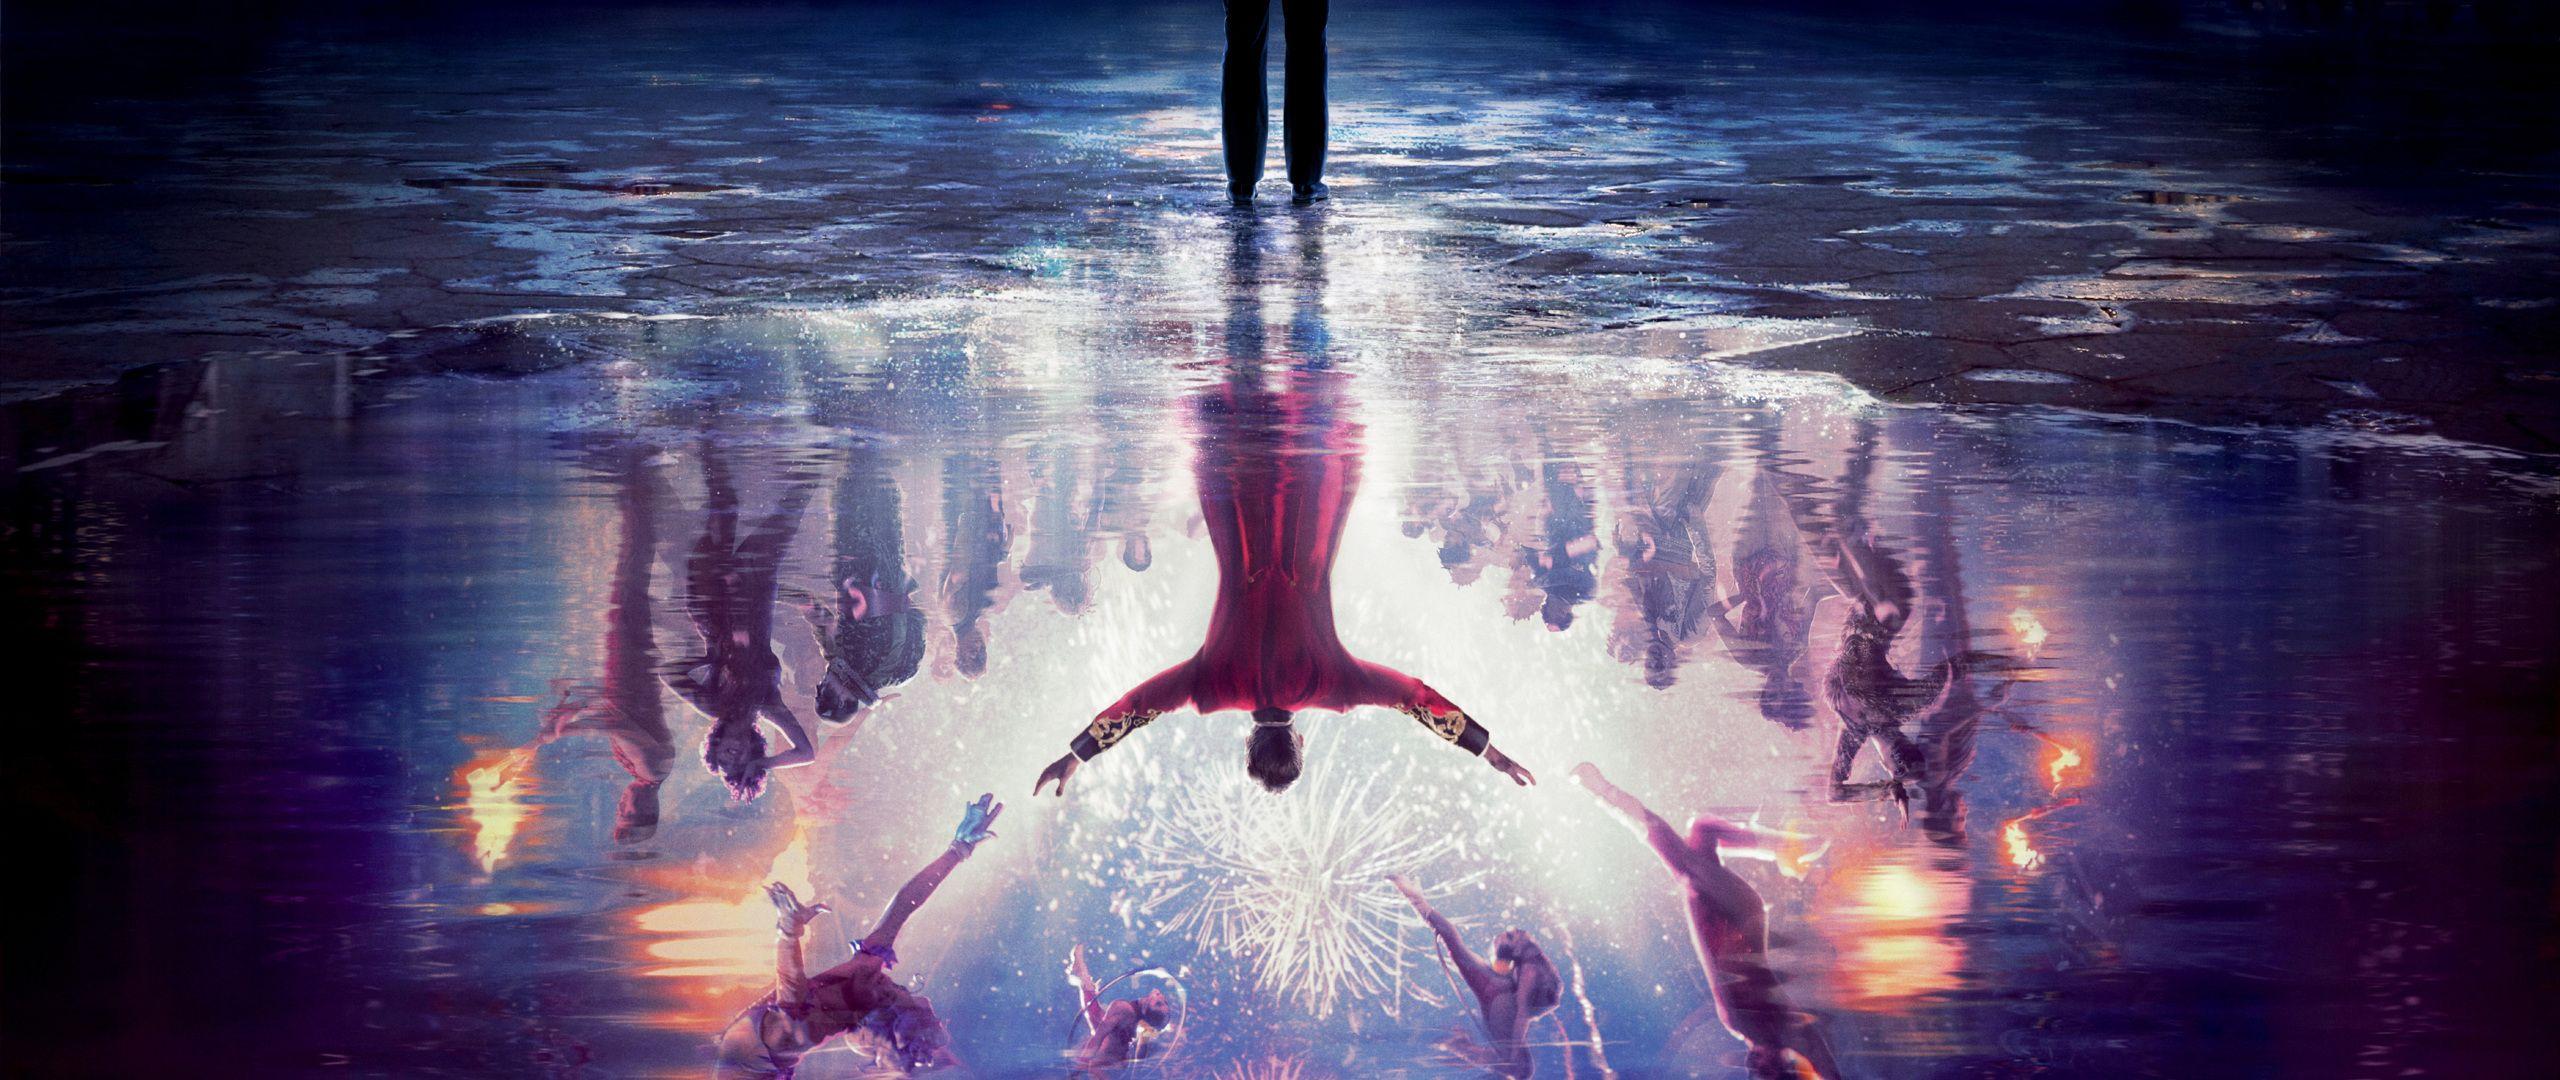 The Greatest Showman 2017, HD 4K Wallpapers.